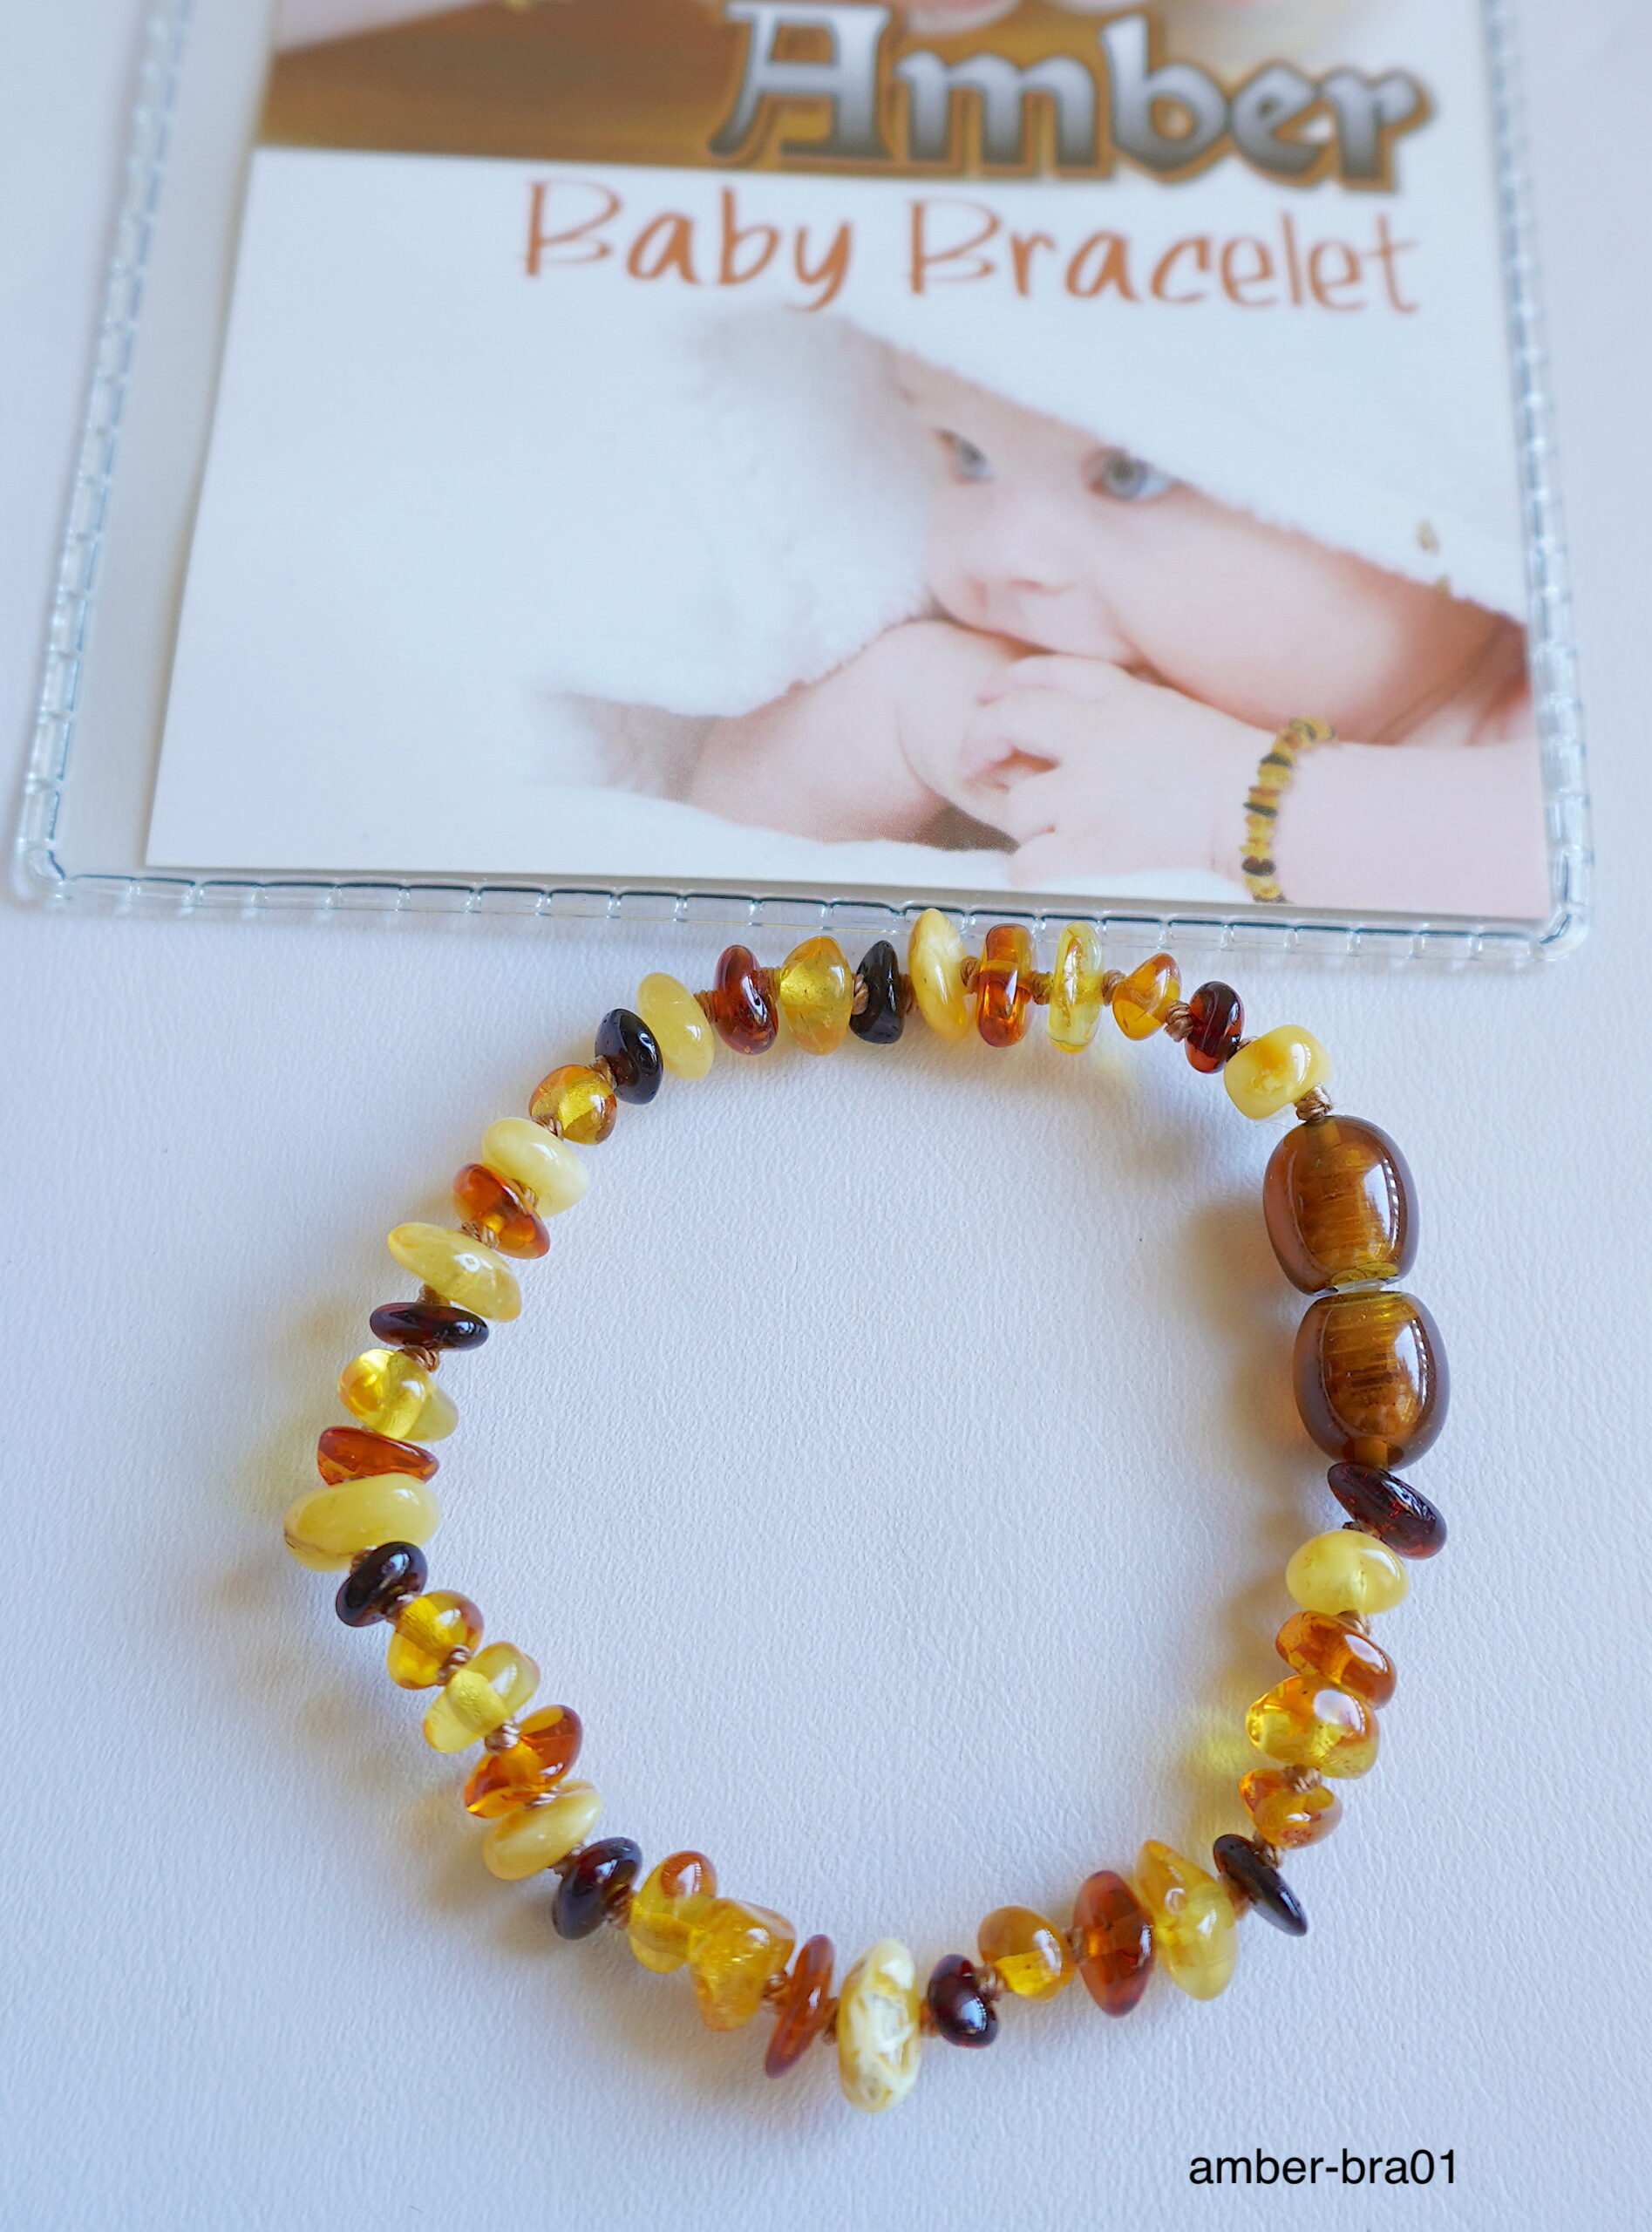 Baby J's - Honey Coloured Bracelet/Anklet - Premium Amber Bracelet -  Handcrafted with 100% Baltic Amber - Fitted with a Safety Screw Clasp -  Knotted to Prevent Scattering - 11cm : Amazon.co.uk: Fashion